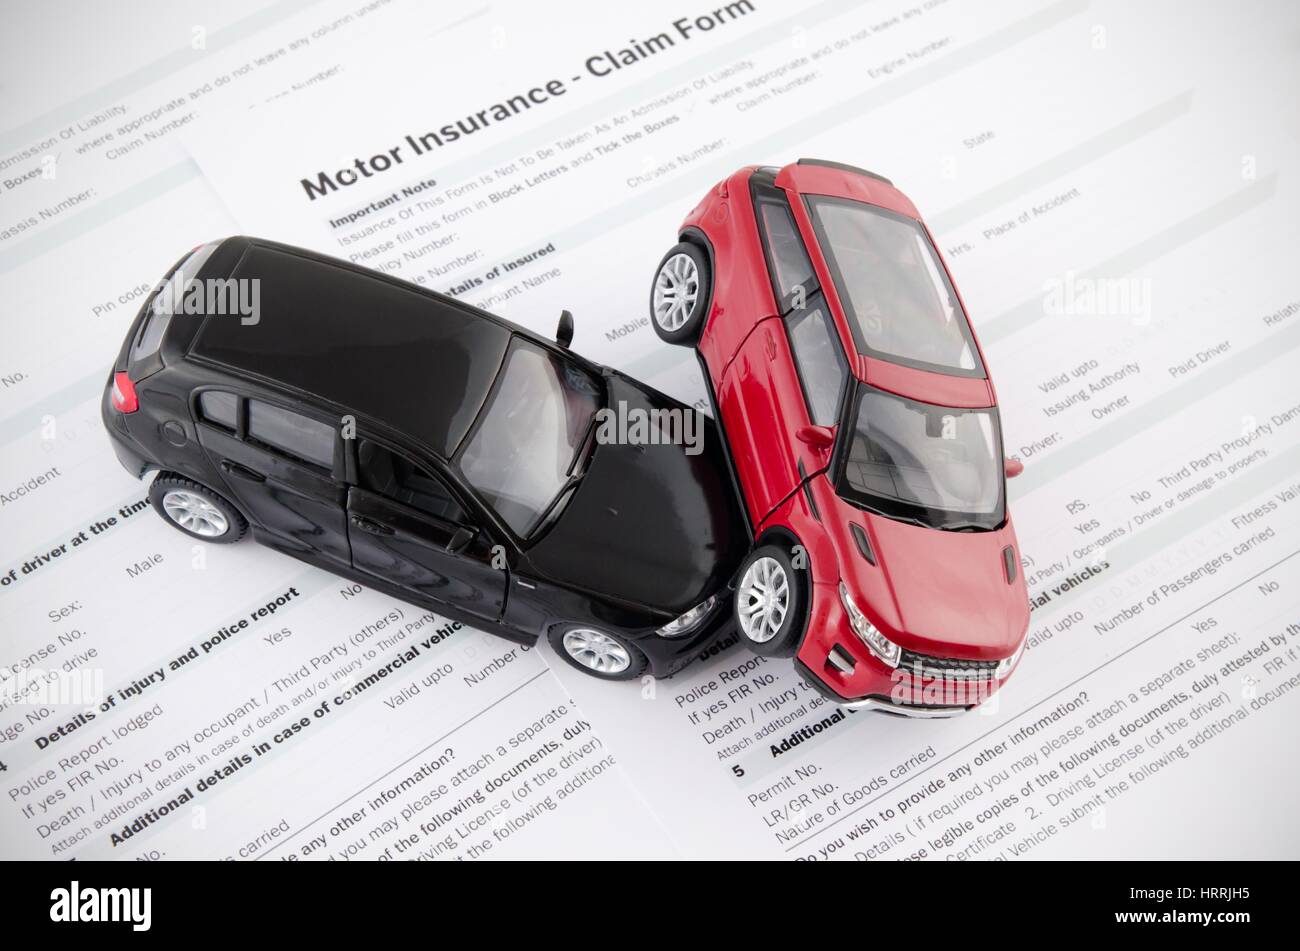 Motor insurance claim form. Car crash and protection concept Stock Photo